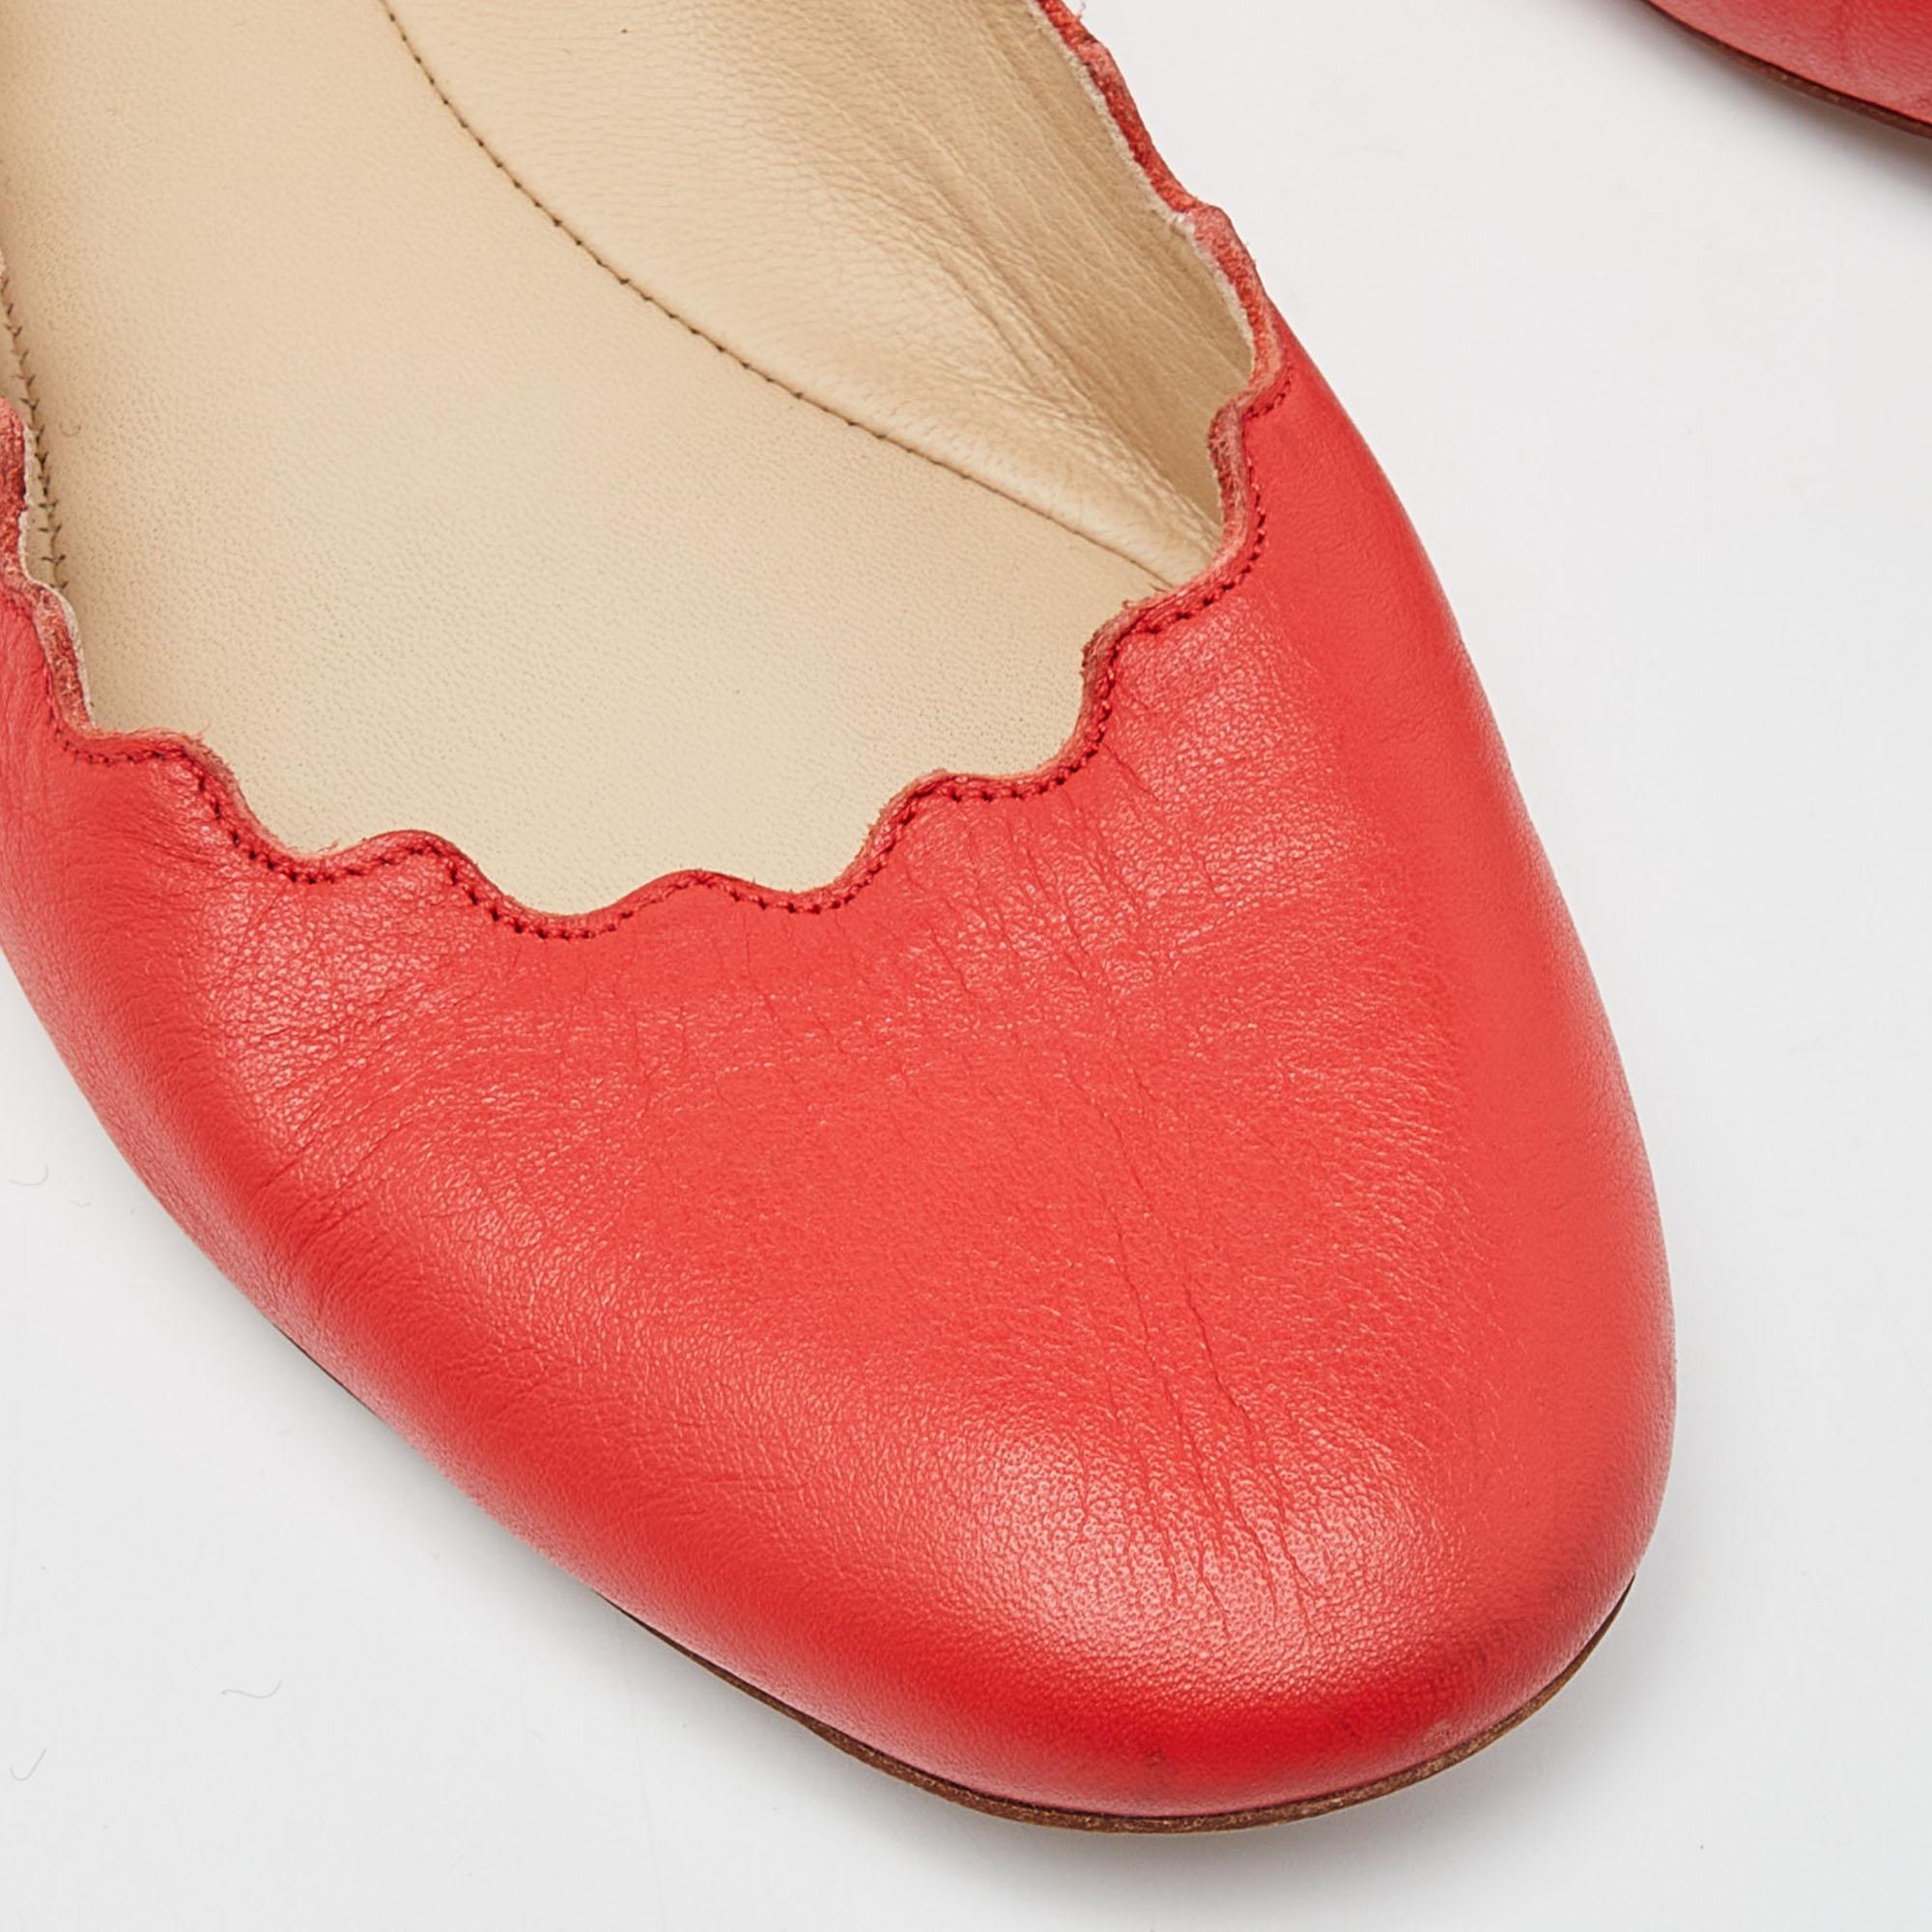 Chloé Red Leather Lauren Scalloped Ballet Flats Size 38